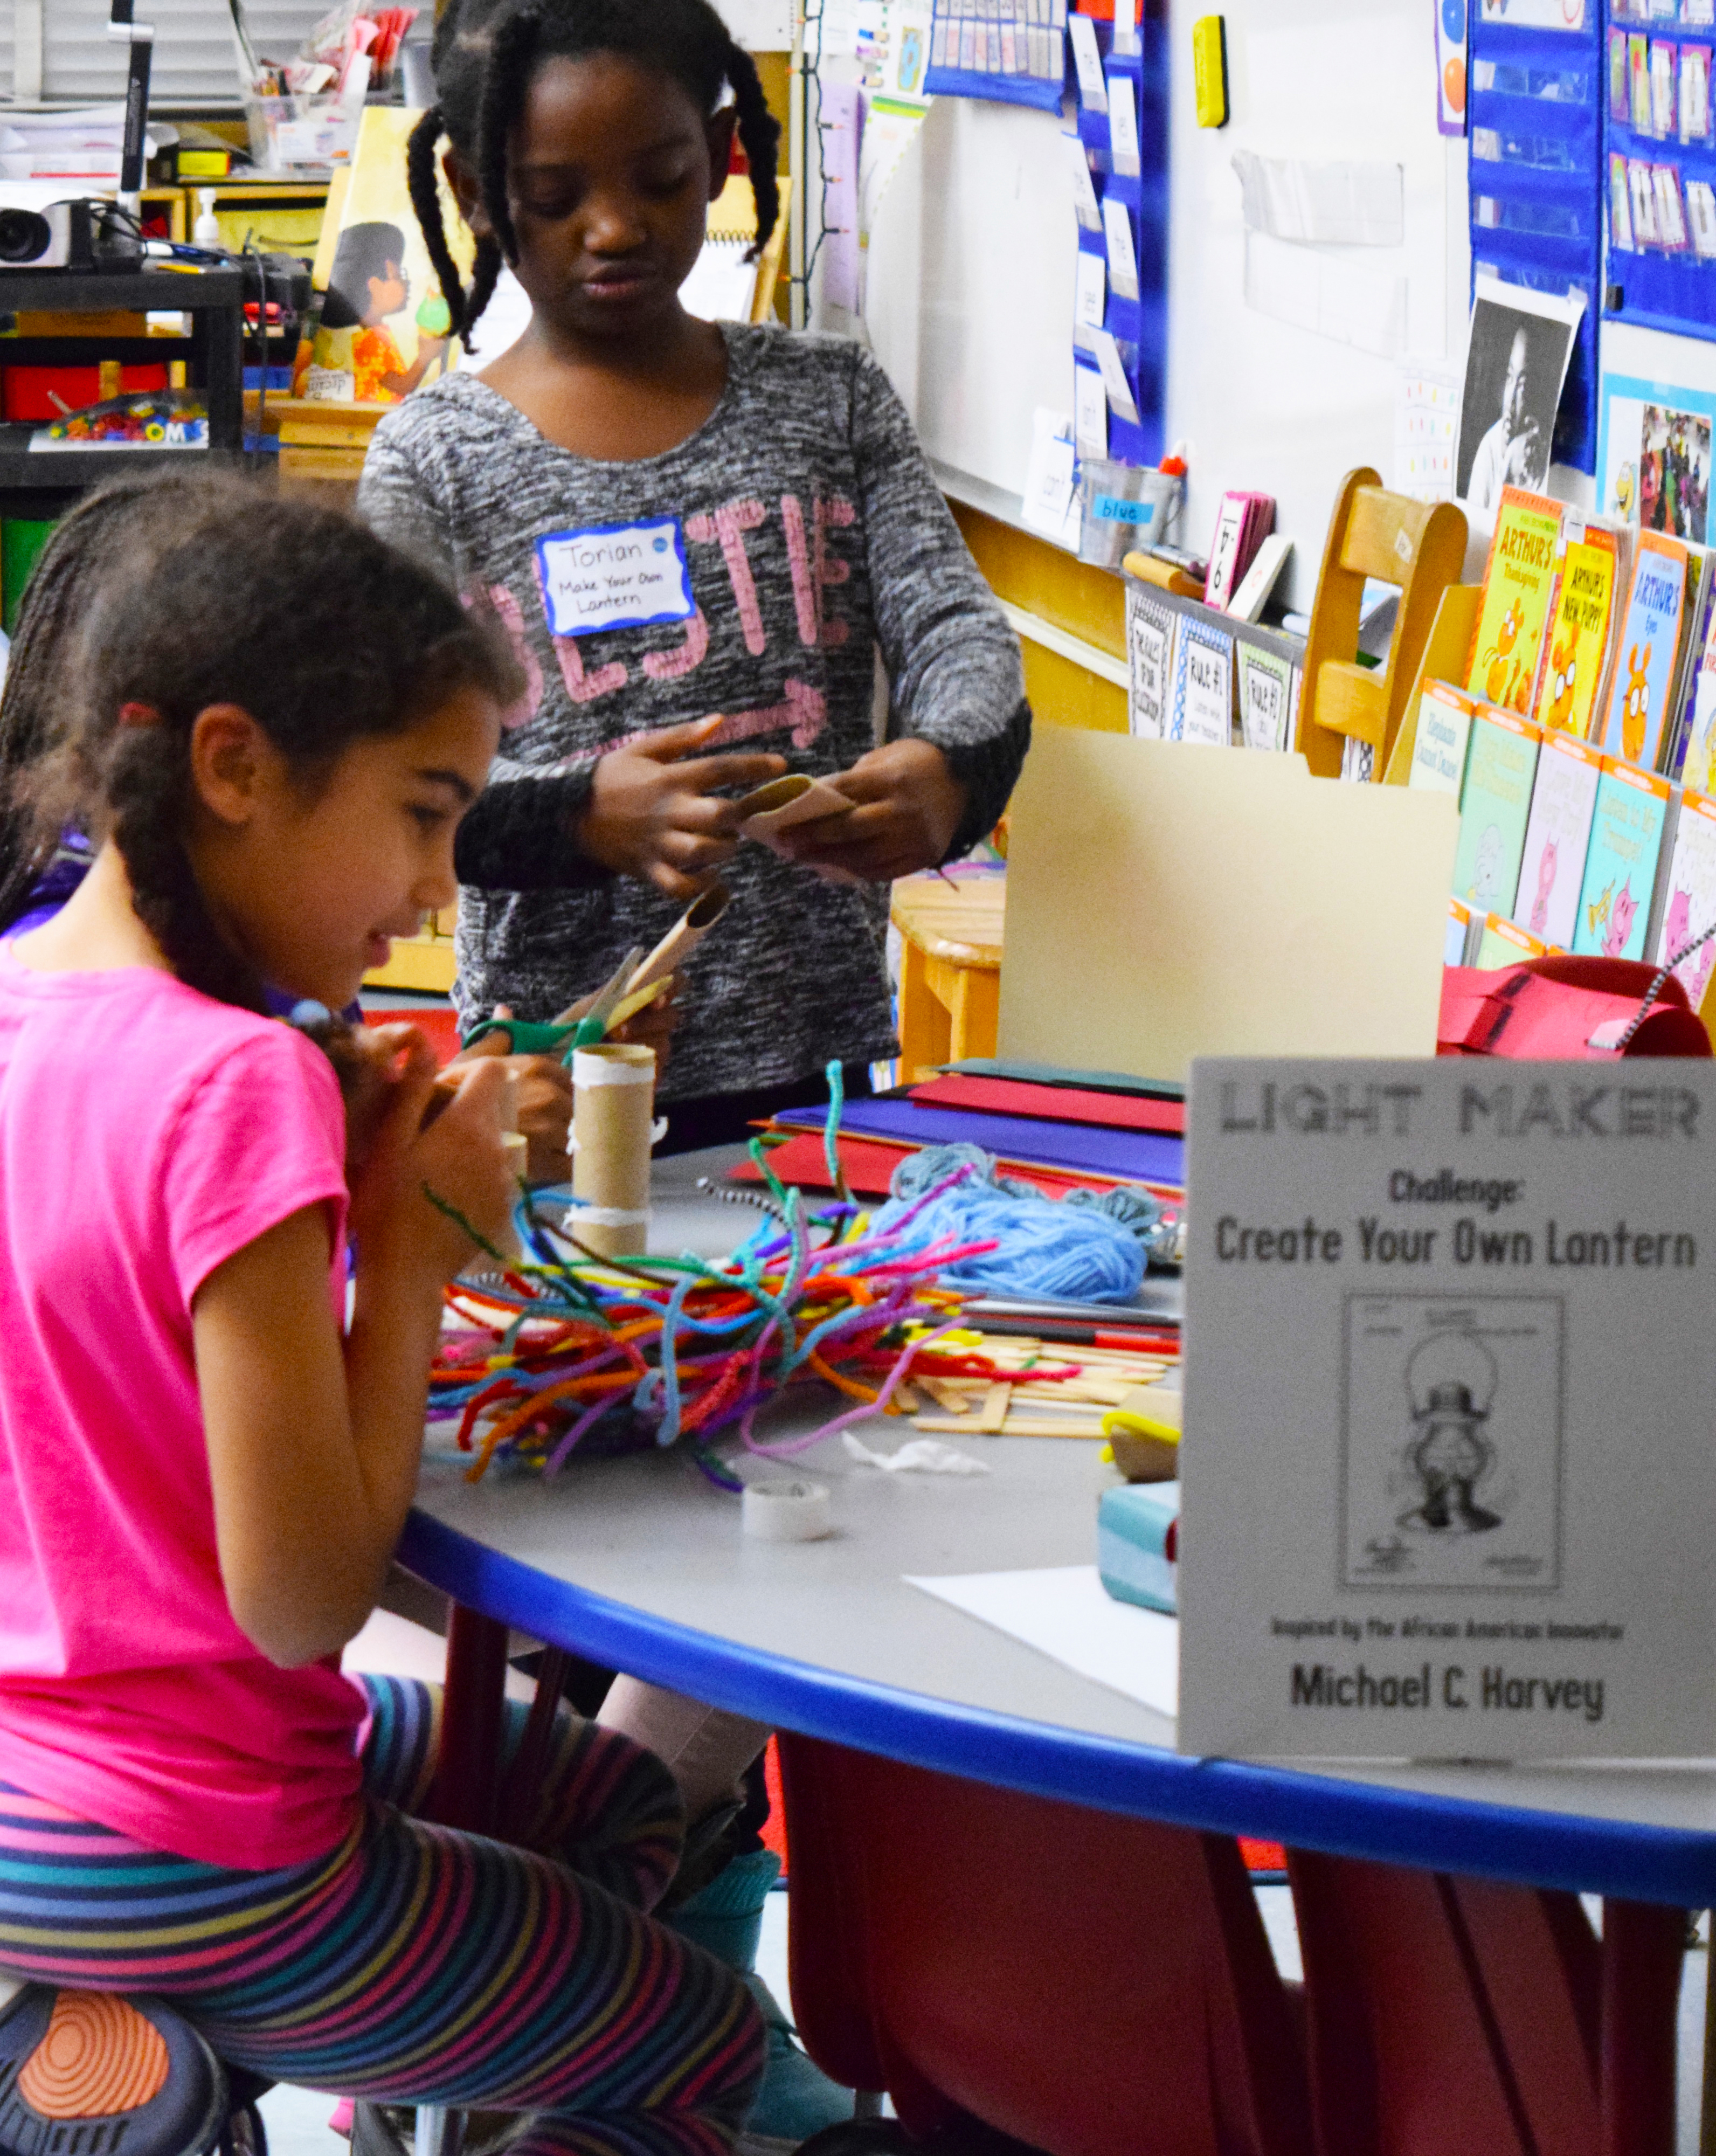 A first-grade student leads the lantern making station at Grass Valley Elementary